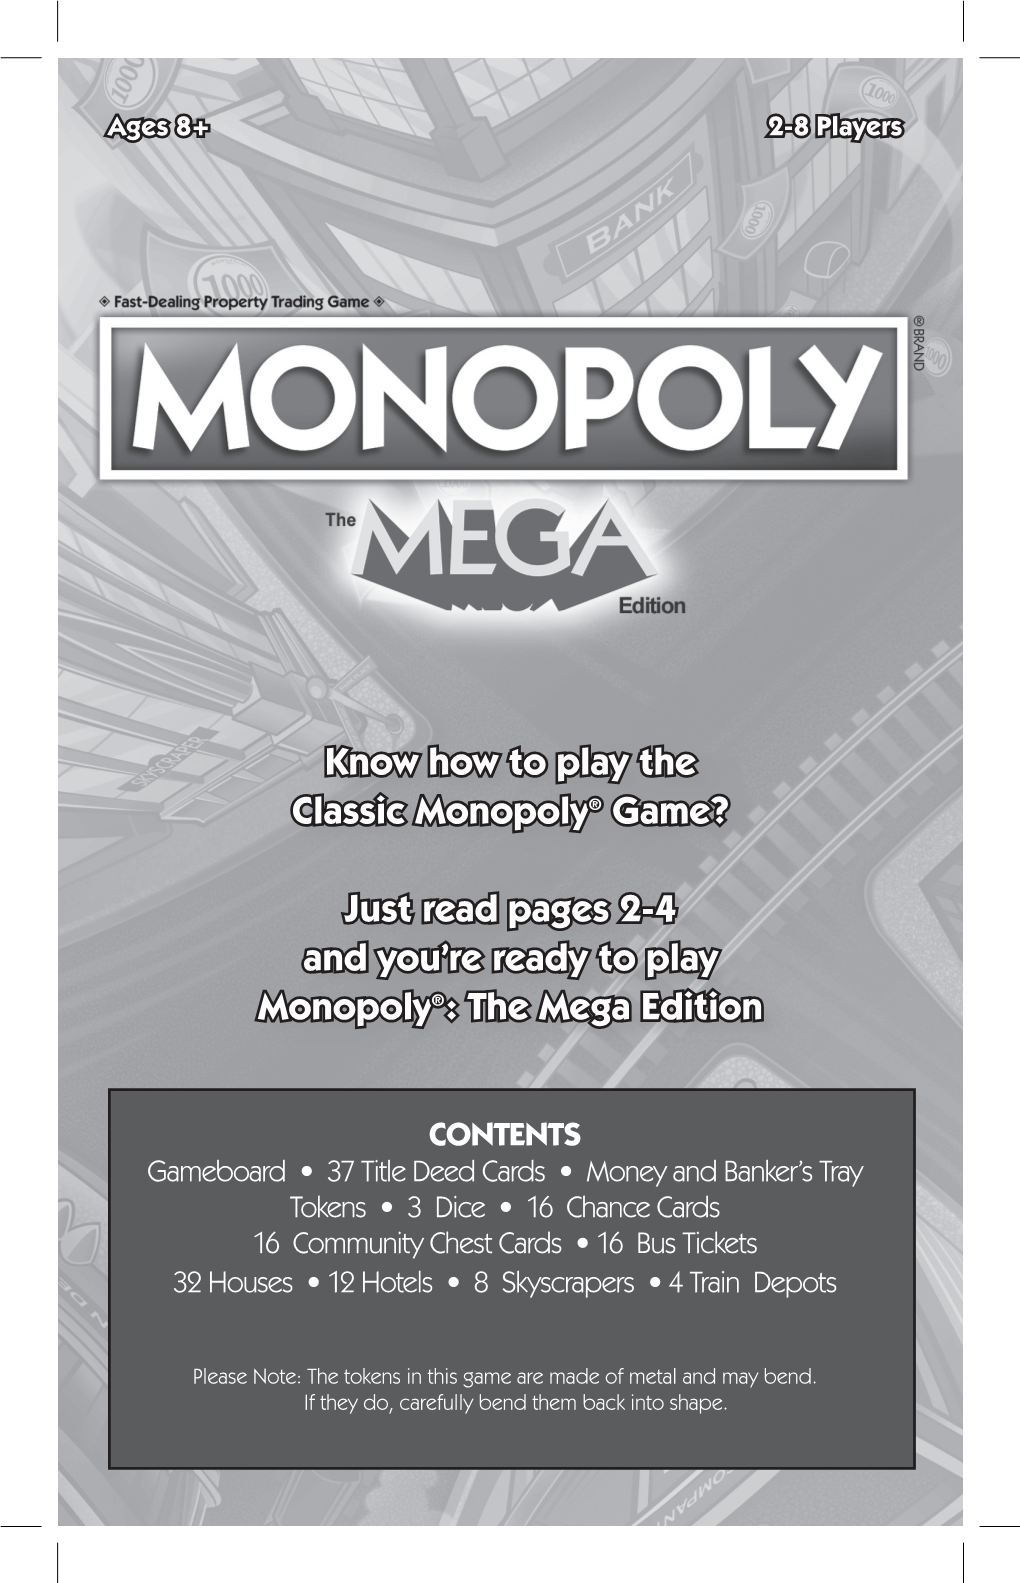 Know How to Play the Classic Monopoly® Game? Just Read Pages 2-4 and You're Ready to Play Monopoly®: the Mega Edition